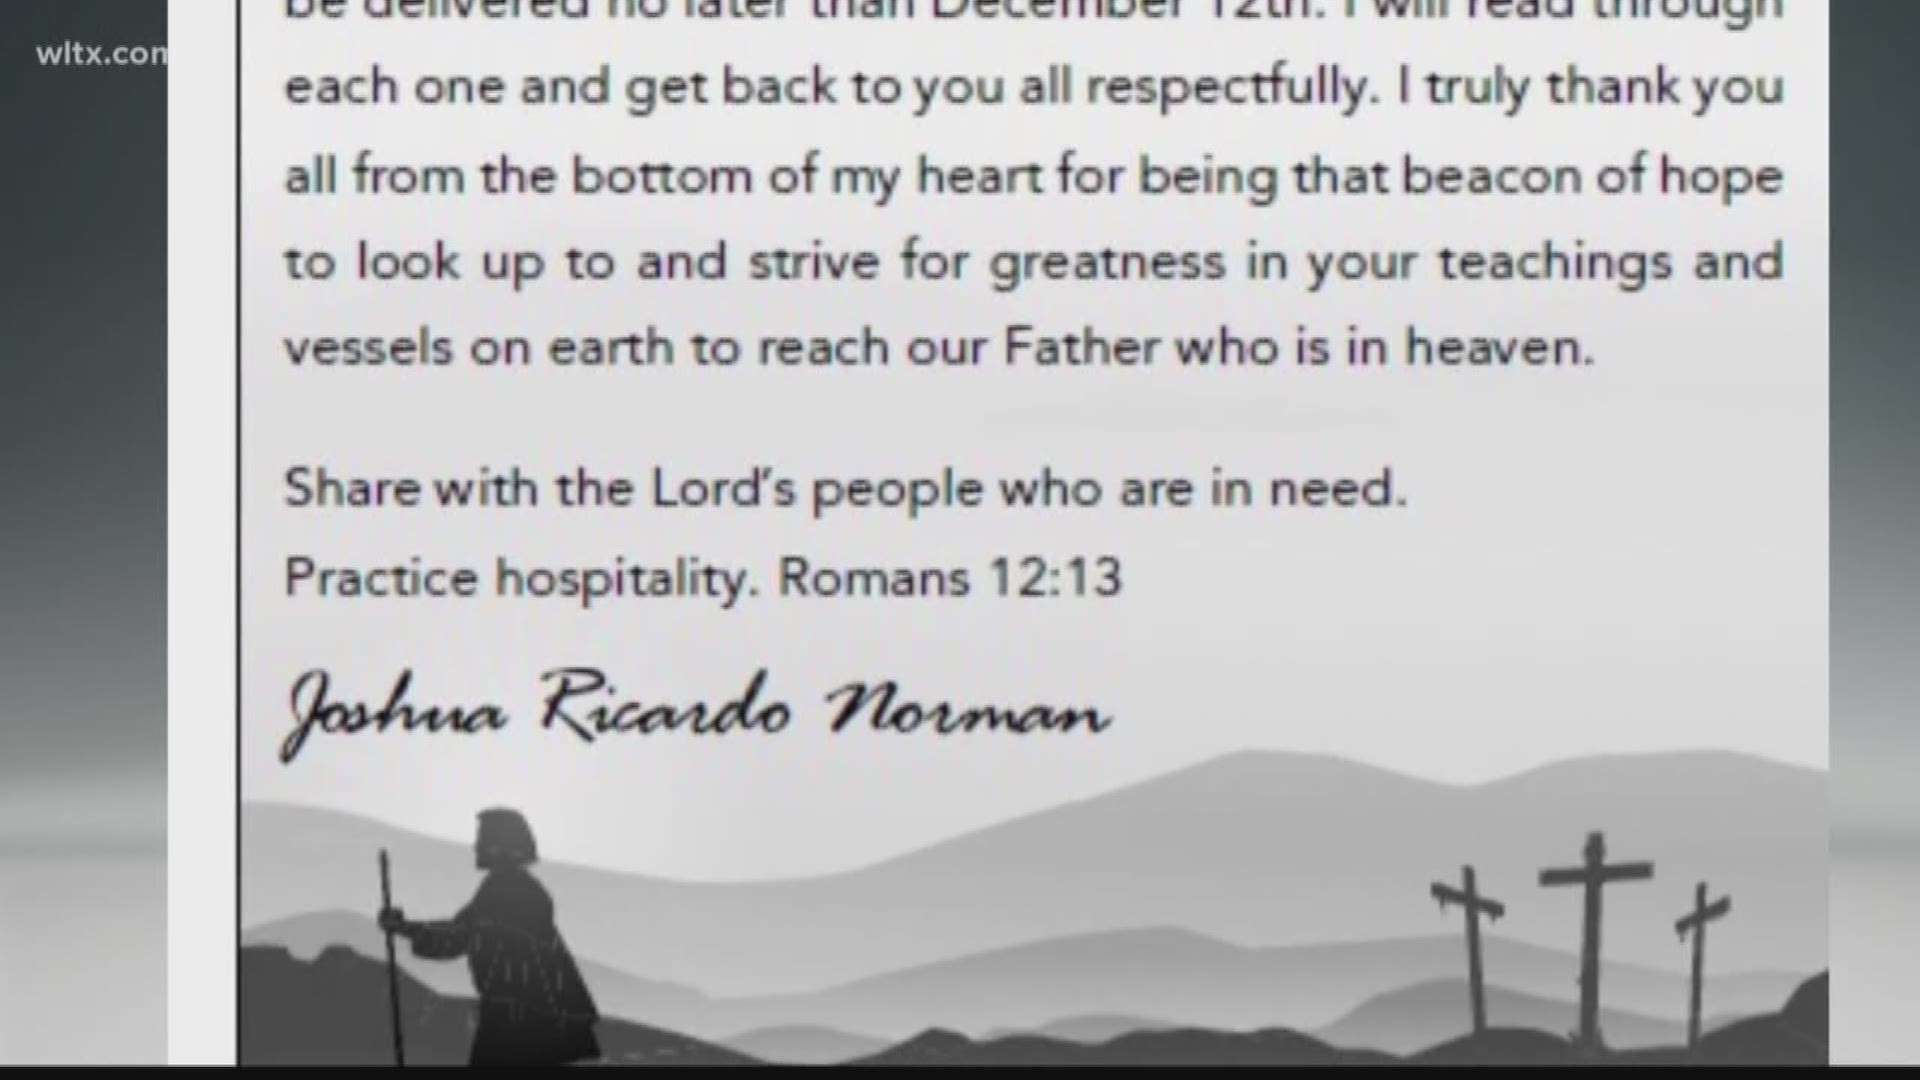 Josh Norman placed a full page asking churches in Greenwood to send him a letter with "the concerns of the church and the needs of the youth."